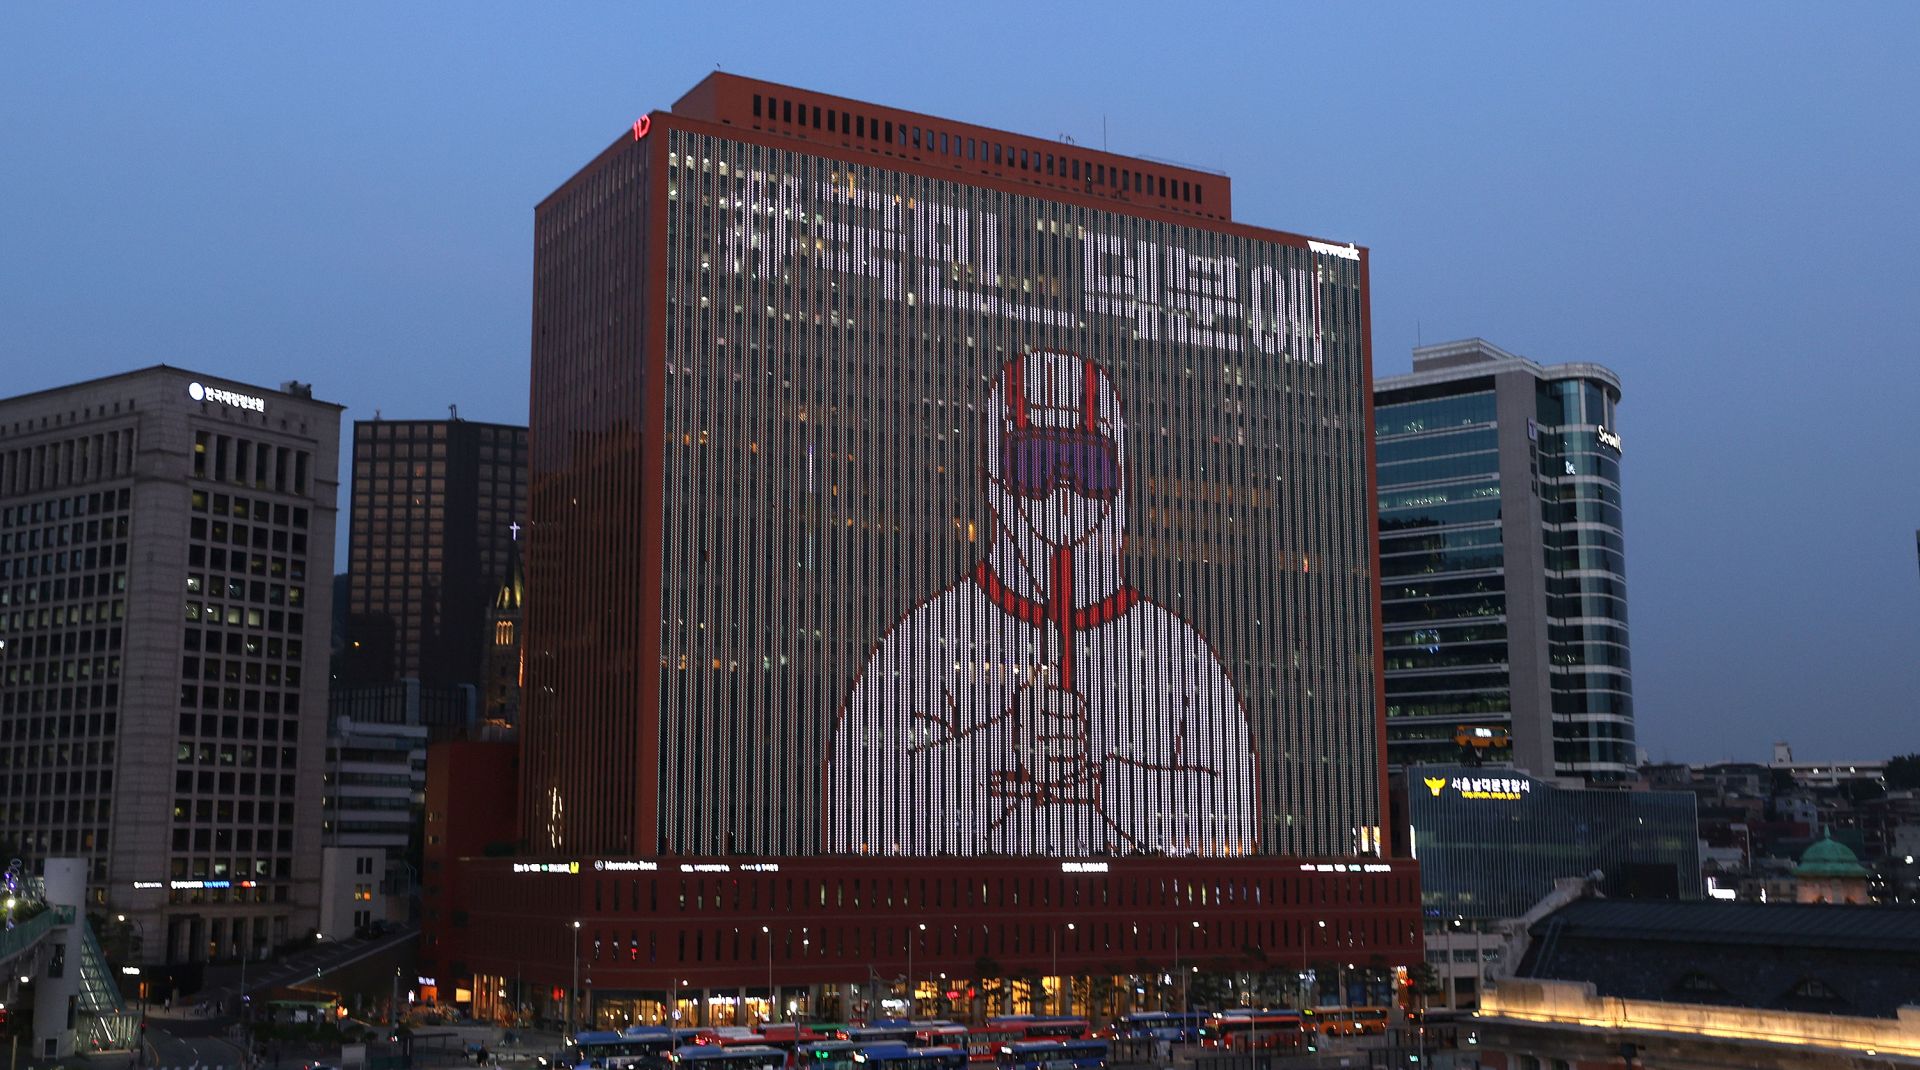 epa08534358 A video featuring an image of a person in protective clothing giving a thumbs-up is displayed on the wall of a building in central Seoul, south Korea, 08 July 2020, as part of a campaign to show appreciation to medical workers and health officials for their efforts in fighting the coronavirus pandemic.  EPA/YONHAP SOUTH KOREA OUT